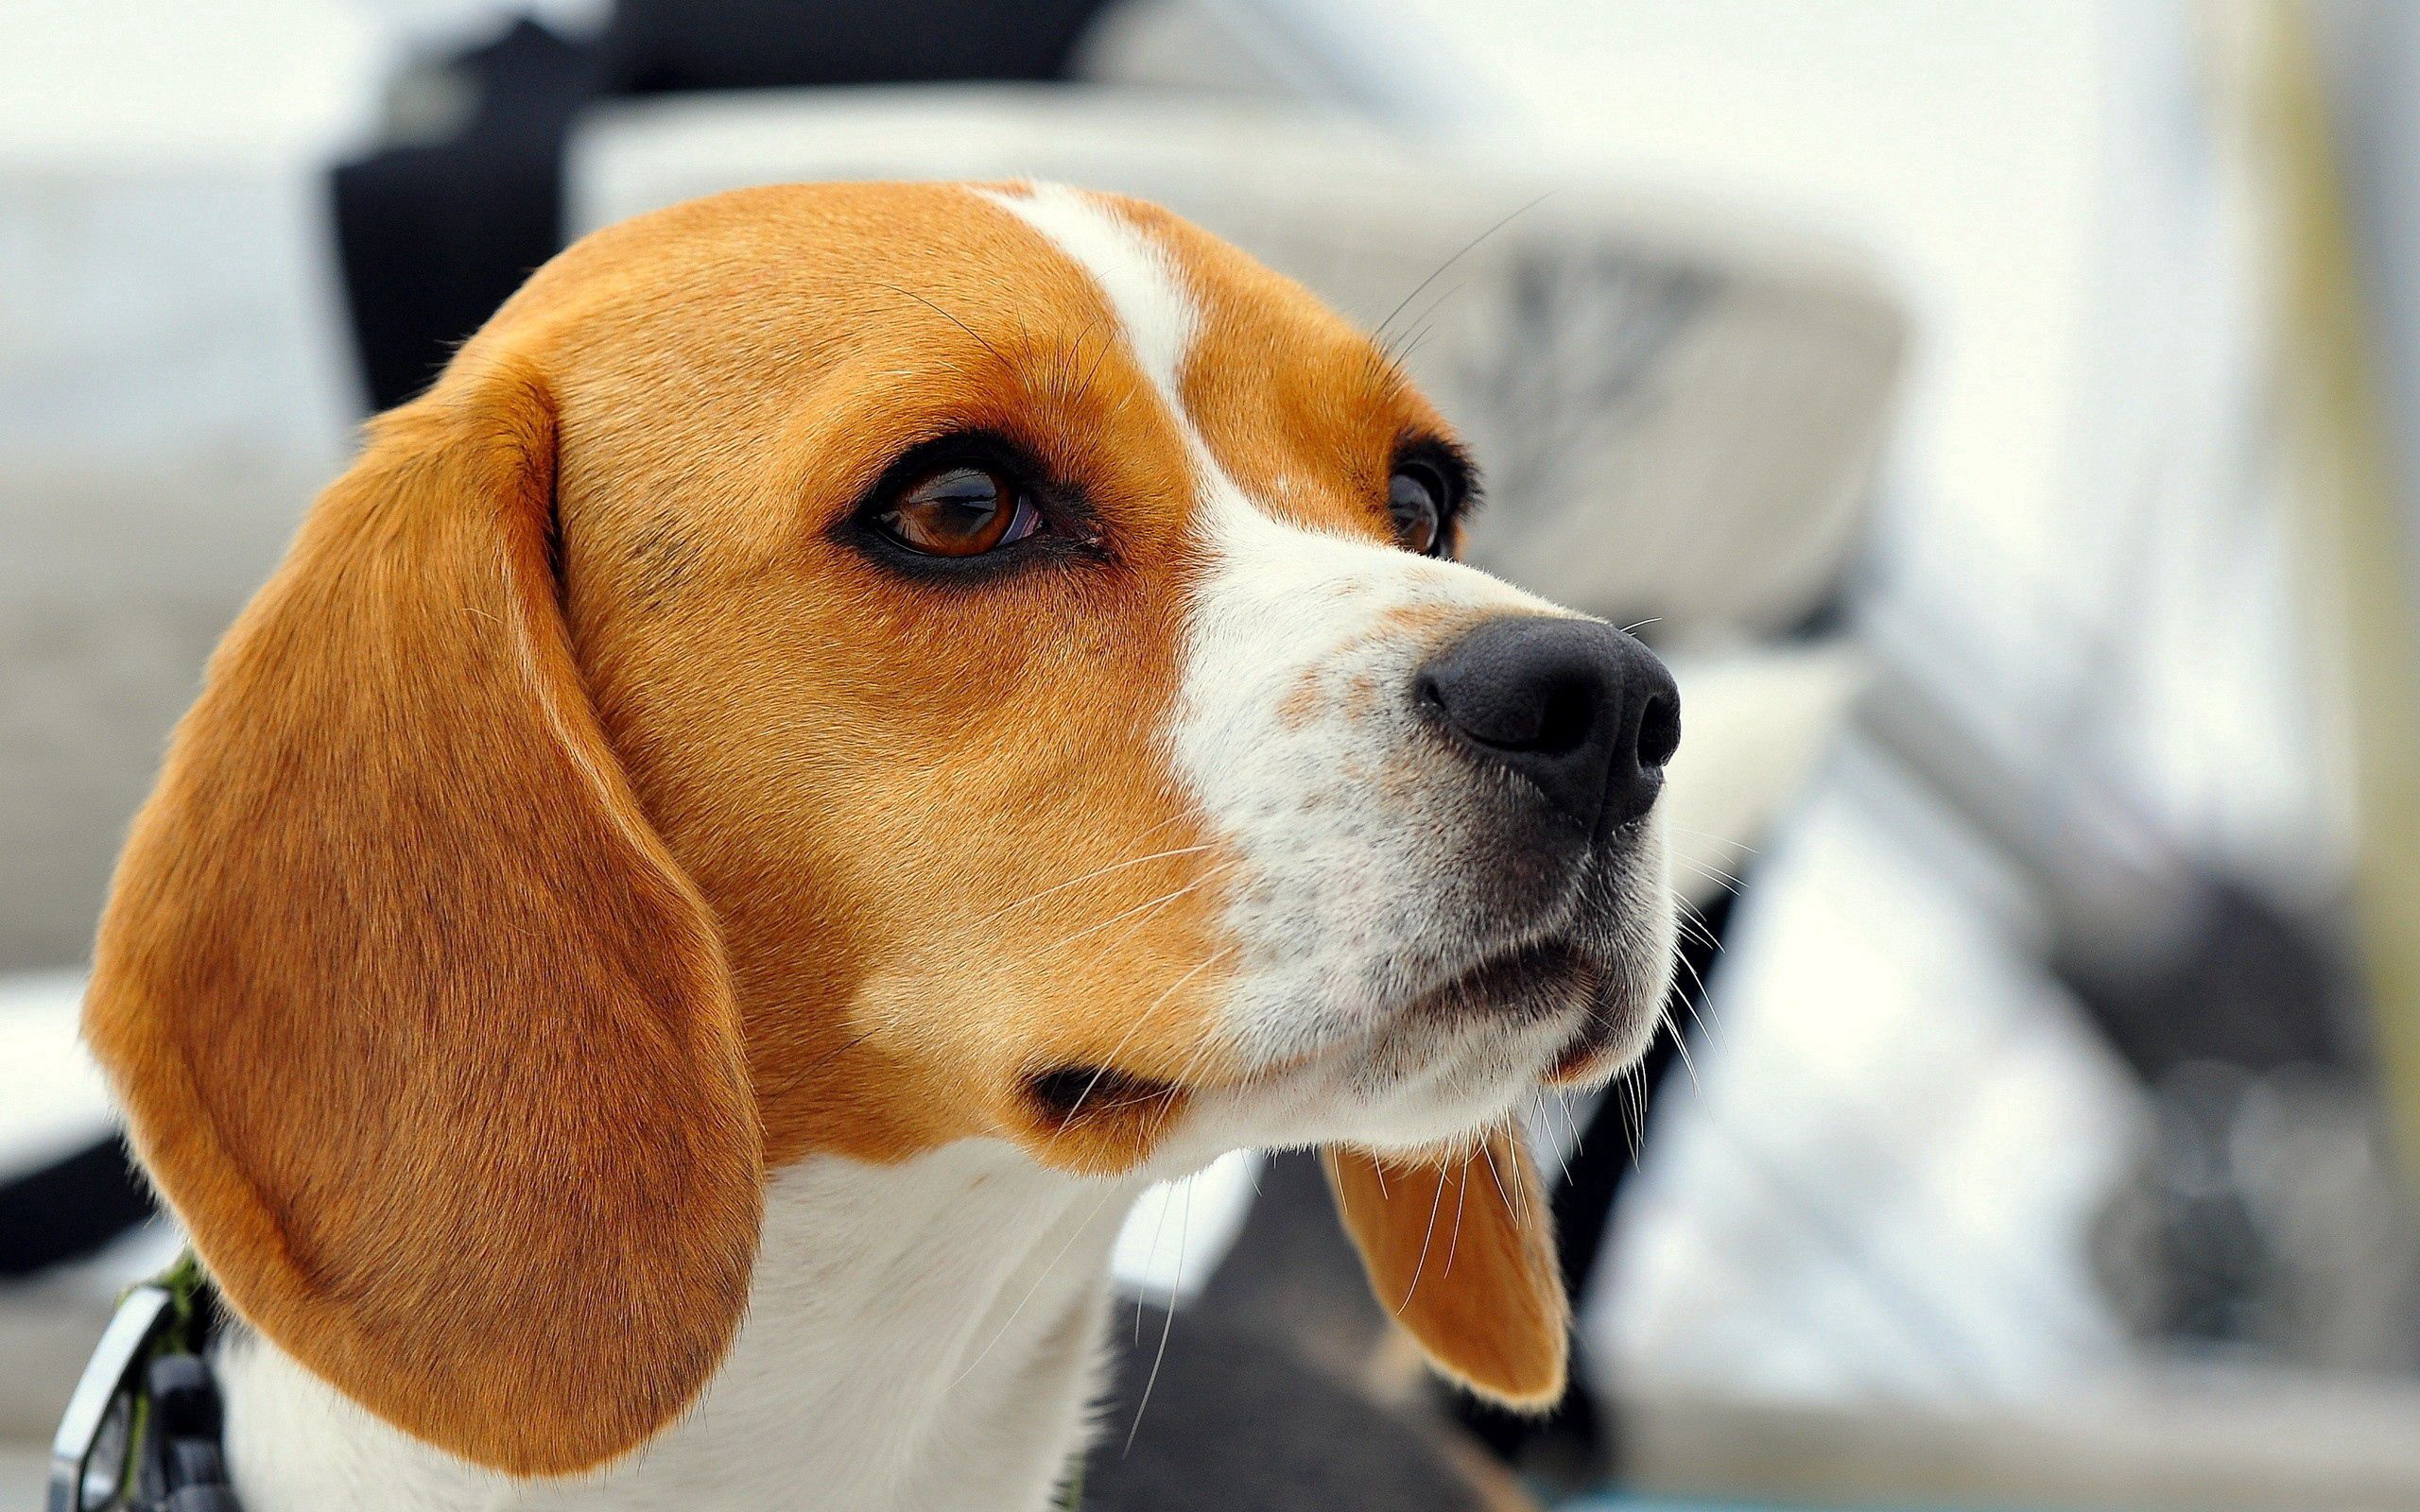 112338 download wallpaper muzzle, animals, dog, puppy, ears, beagle screensavers and pictures for free